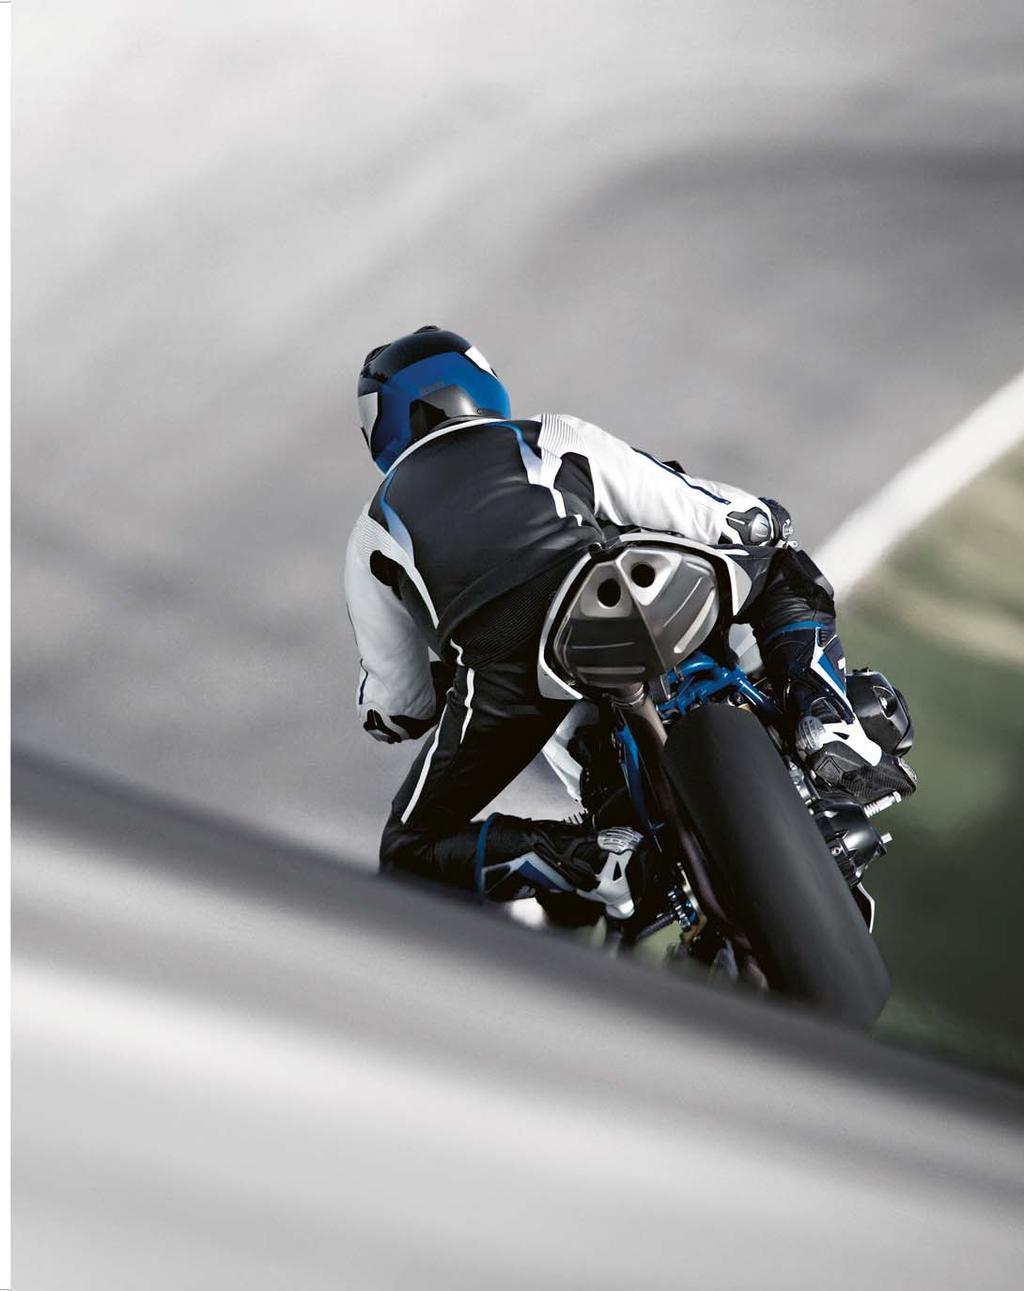 Mehr, mehr, mehr. The pinnacle of evolution. The engine of the new HP2 Sport is truly a masterpiece of engineering.